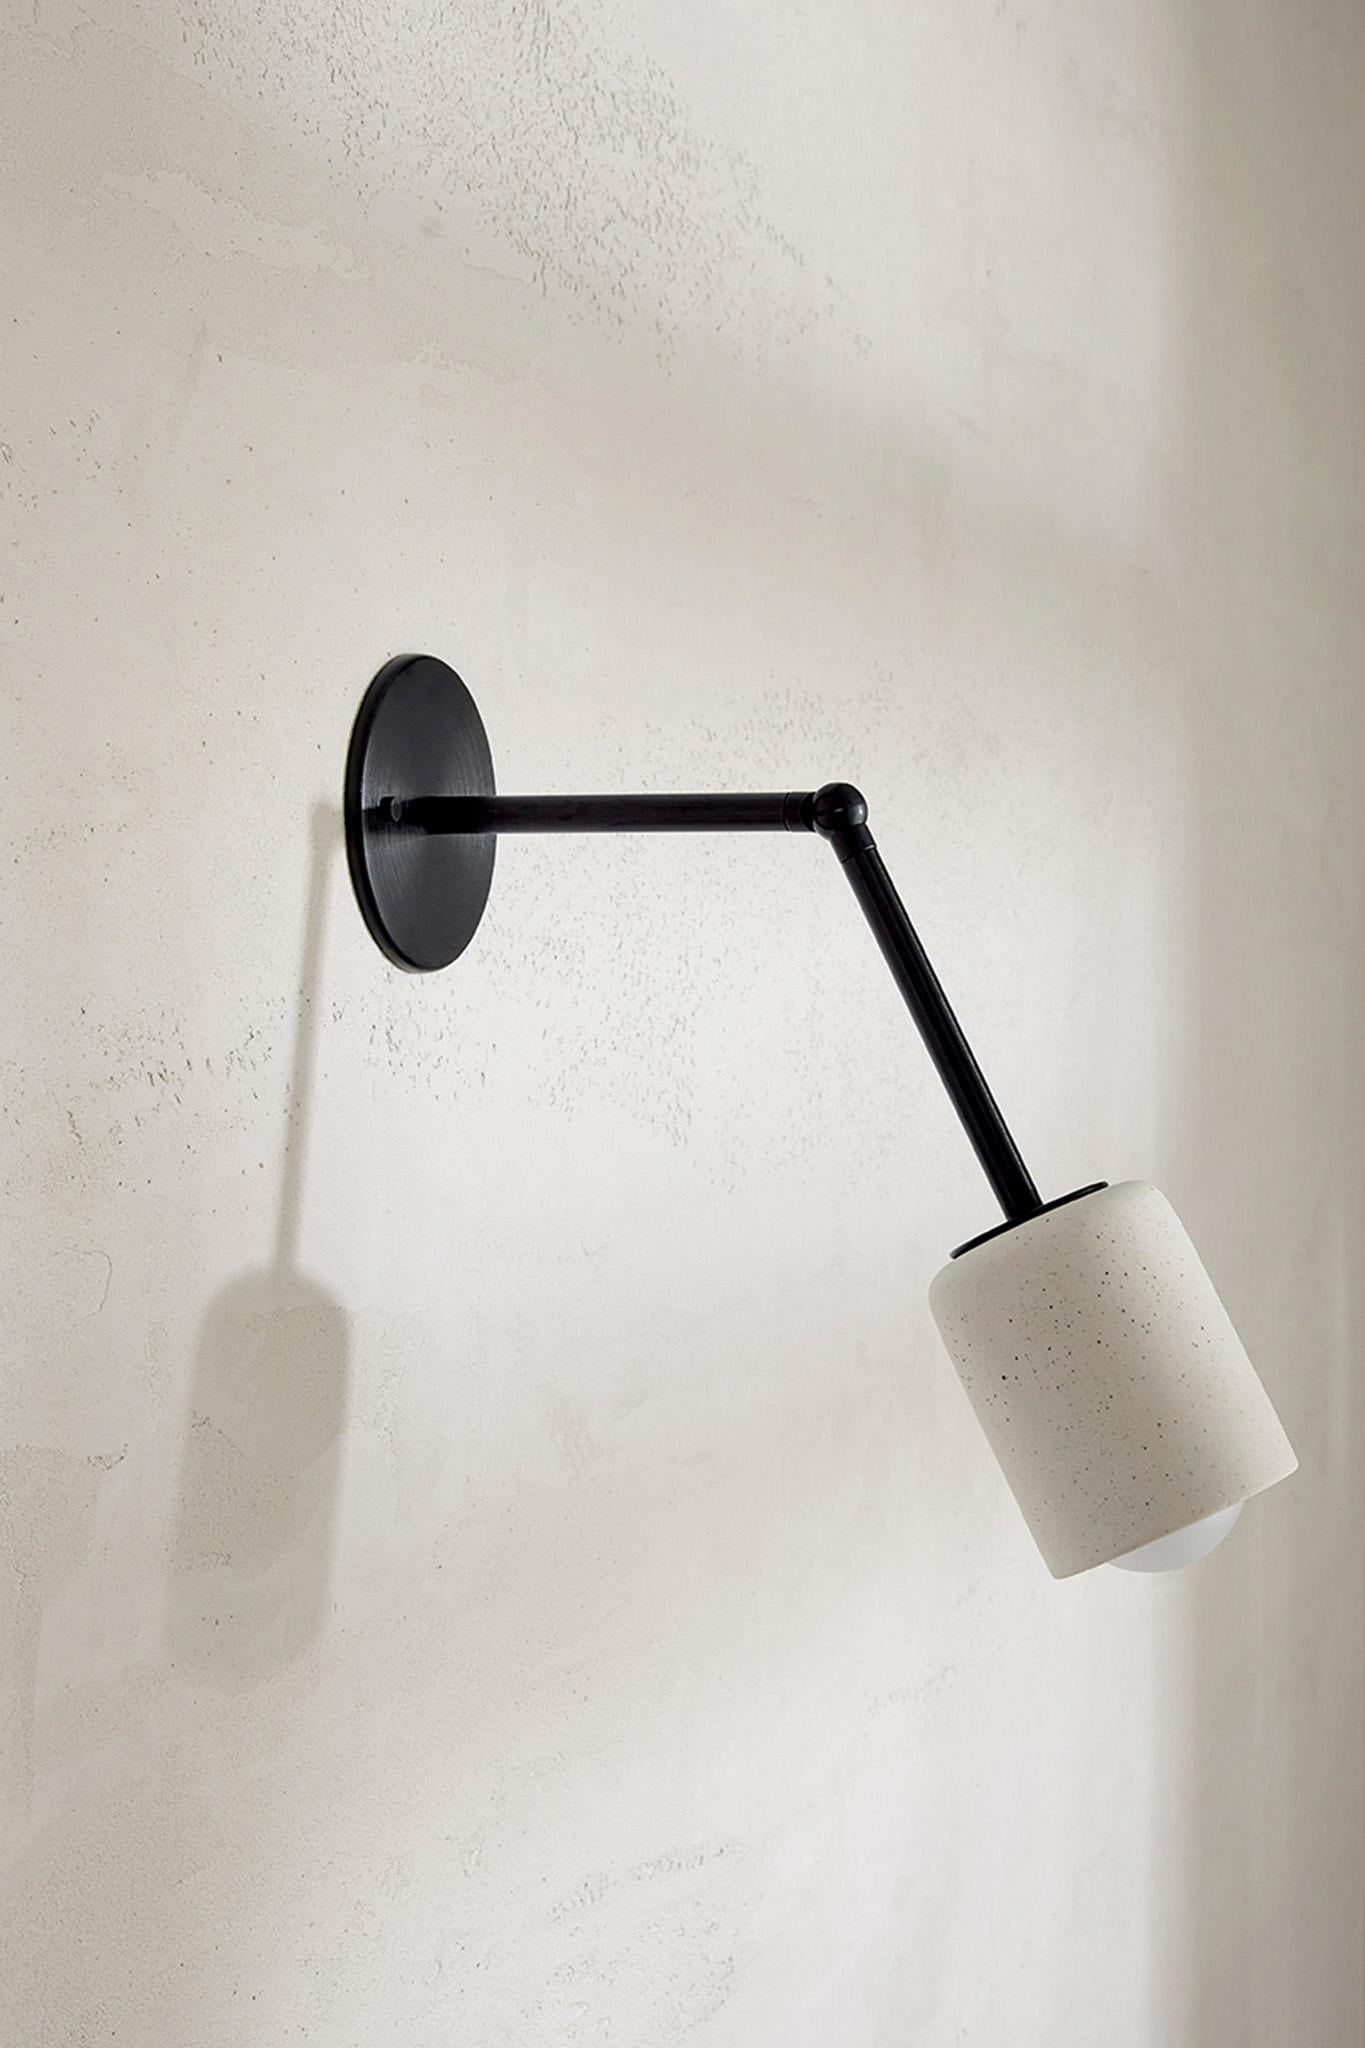 Simple cylindrical ceramic forms define the Terra 1 range, which comes in pendant light, surface, and long and short articulating wall light formats. The Terra 1 Long Articulating Wall Light is available in a choice of three tones – Slate, Sage and